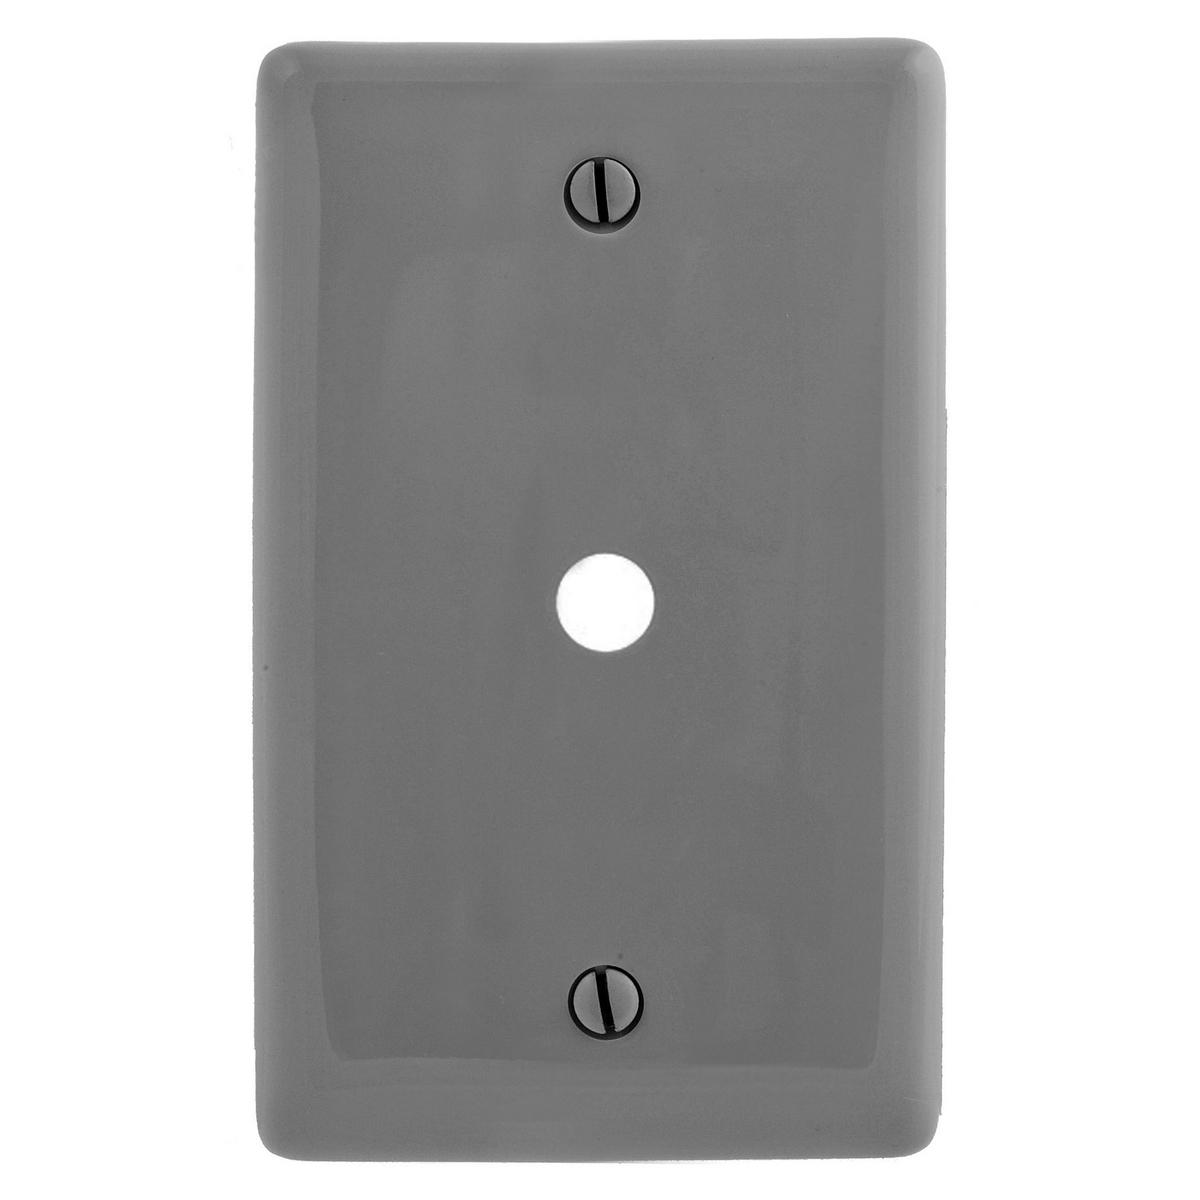 Hubbell NP11GY Wallplates, Nylon, 1-Gang, .406" Opening, Box Mount, Gray  ; Reinforcement ribs for extra strength ; High-impact, self-extinguishing nylon material ; Captive screw feature holds mounting screw in place ; Standard Size is 1/8" larger to give you extra cove